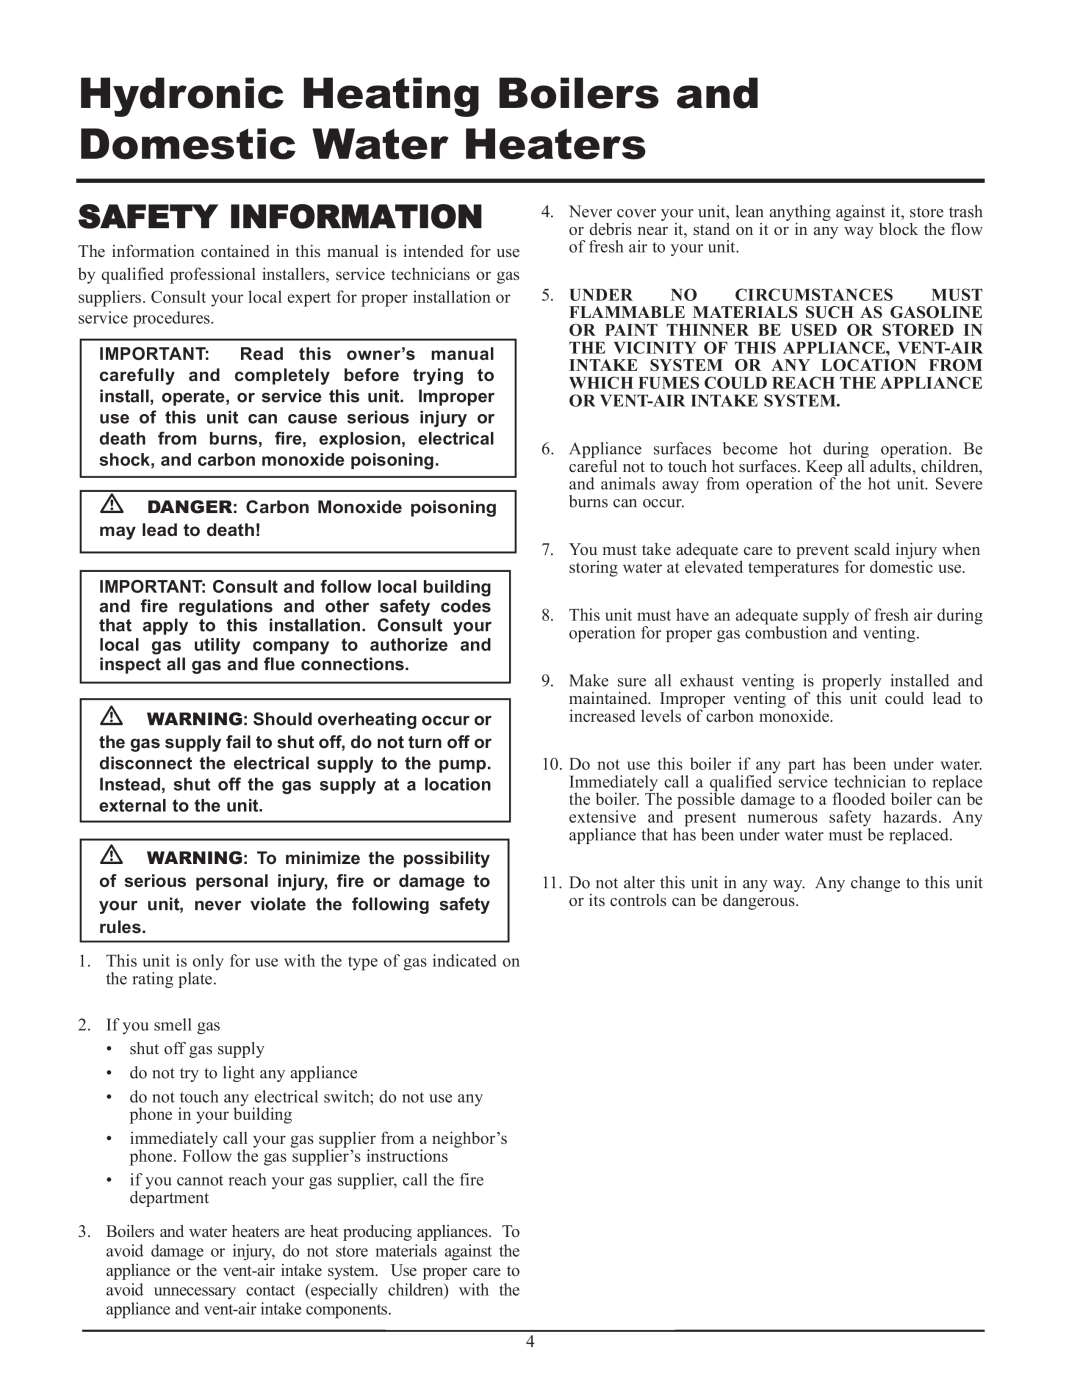 Lochinvar CF-CH(E)-i&s-08, 999 - 750, 399 Safety Information, DANGER Carbon Monoxide poisoning may lead to death 